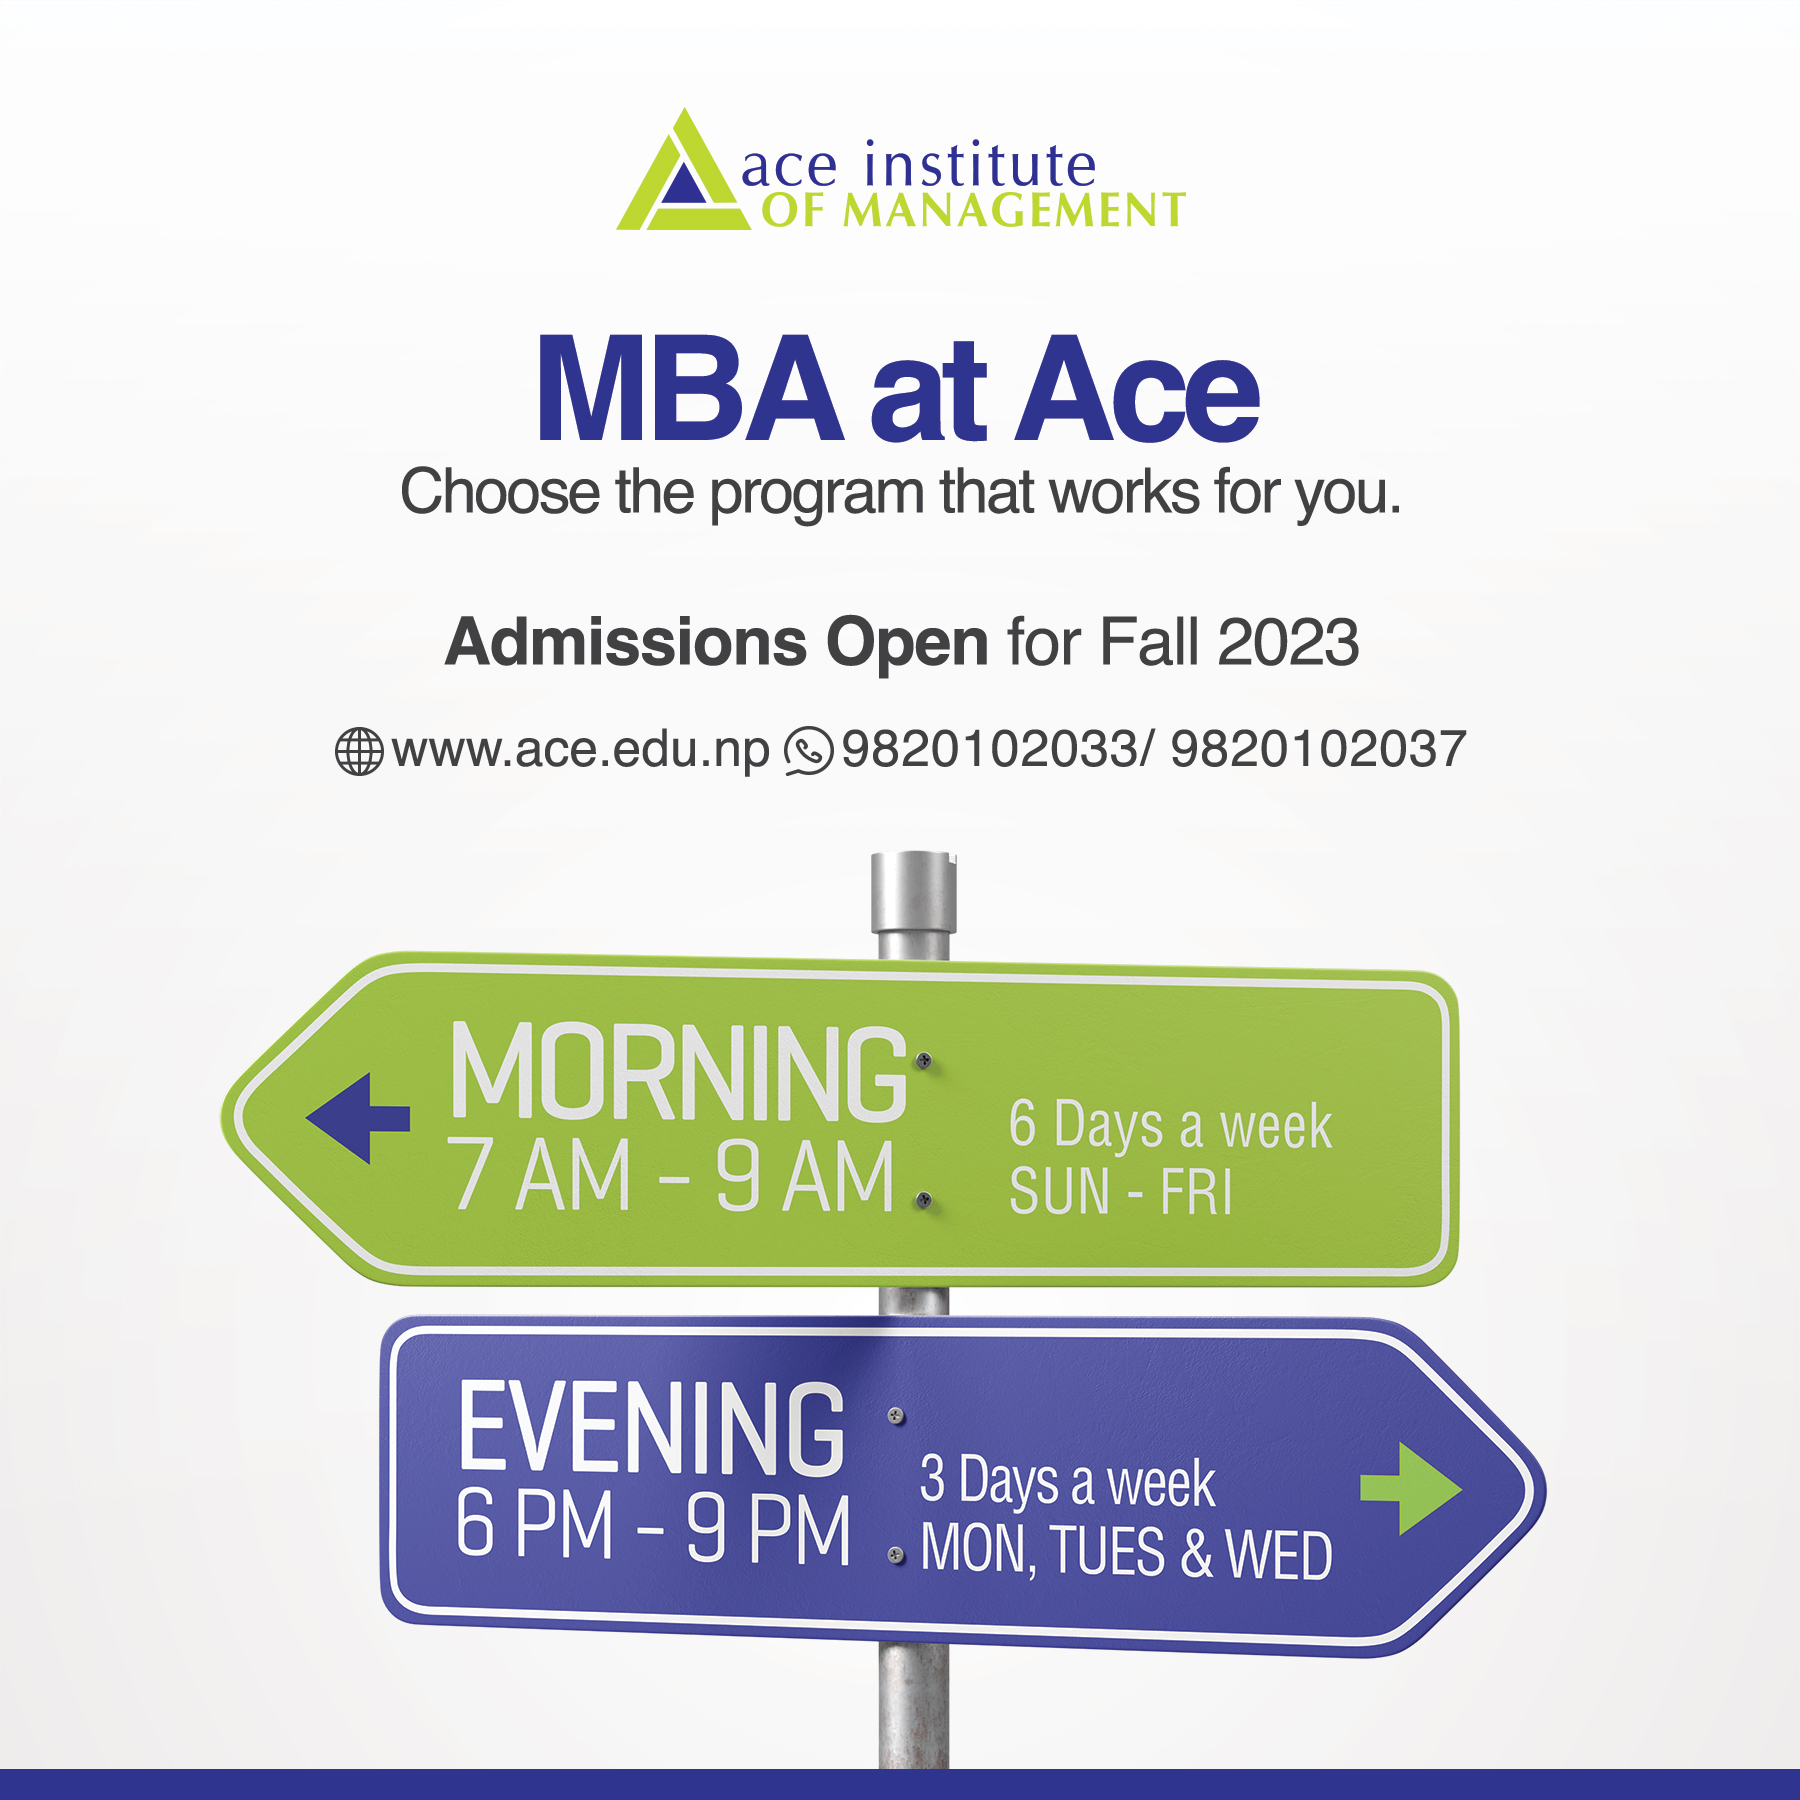 Admissions open for MBA Morning and MBA Evening at Ace.